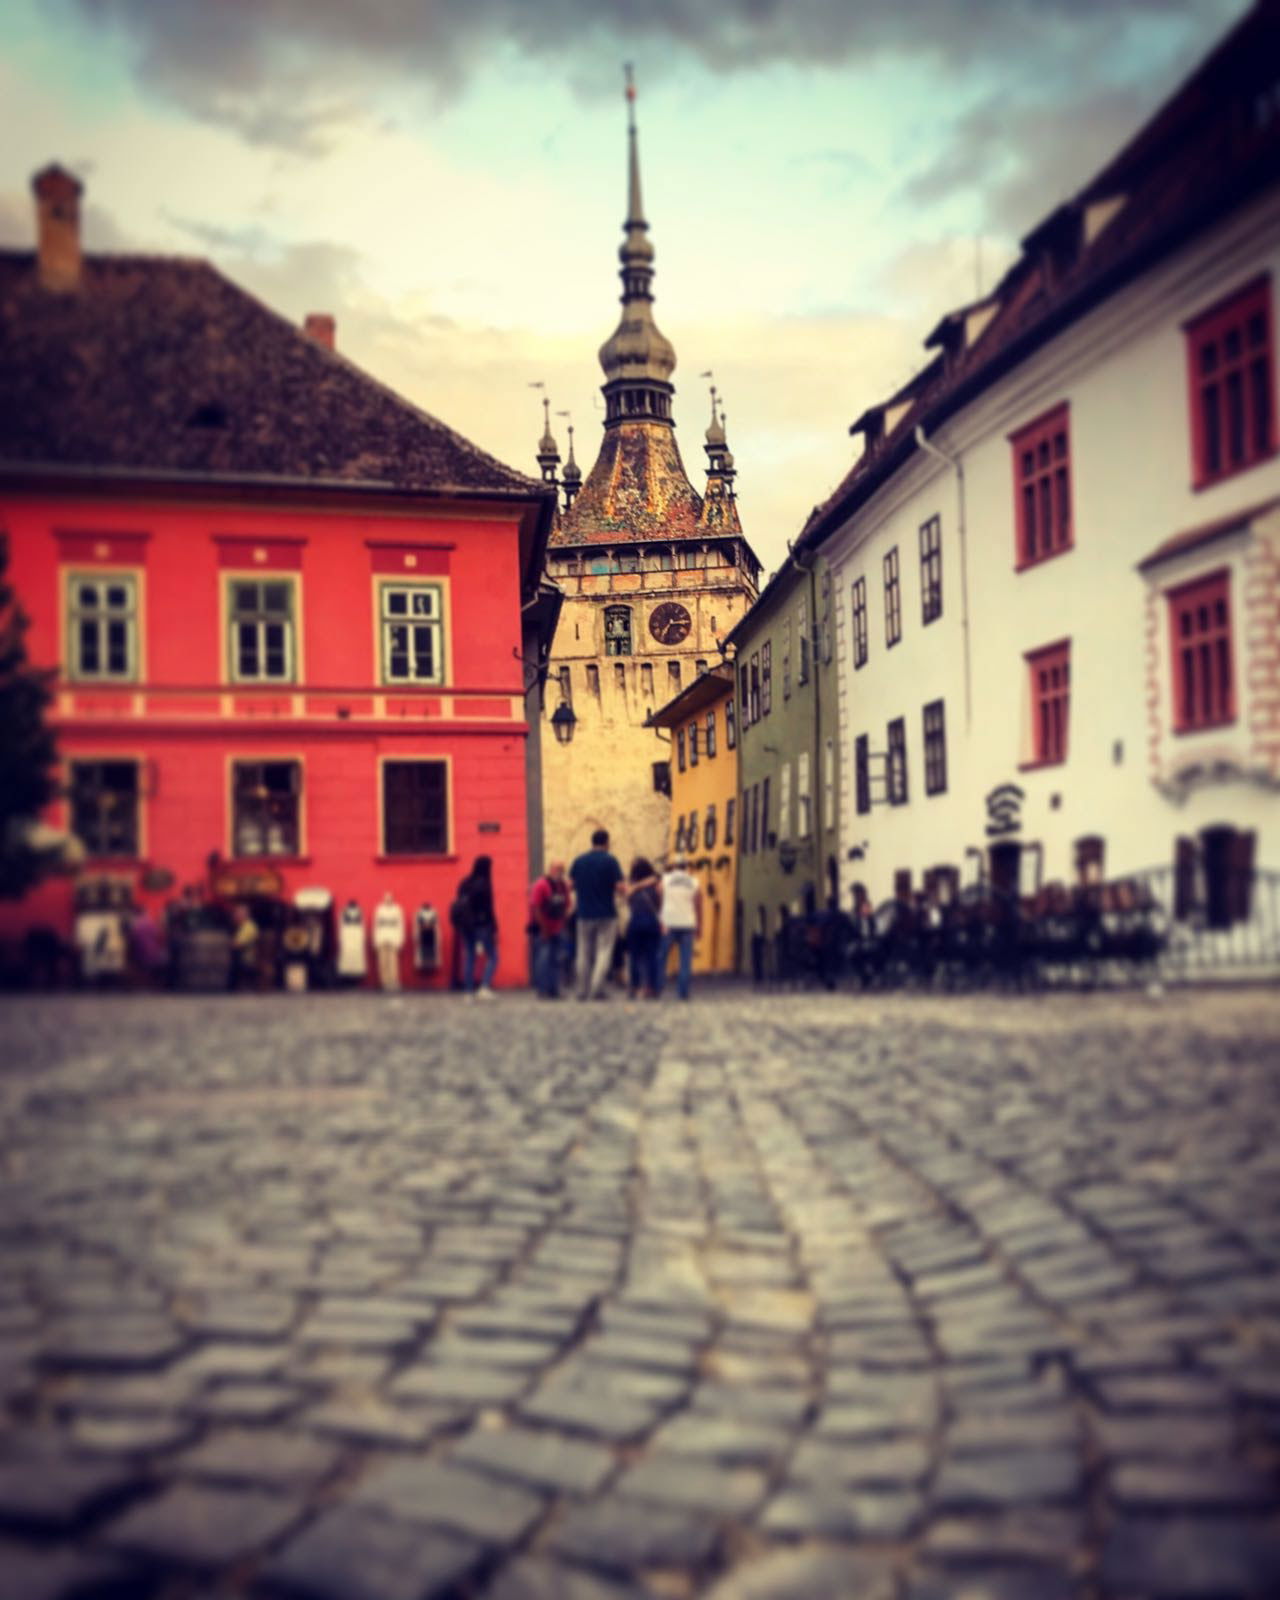 The Clock Tower from the Main Square, Sighisoara, Mures County